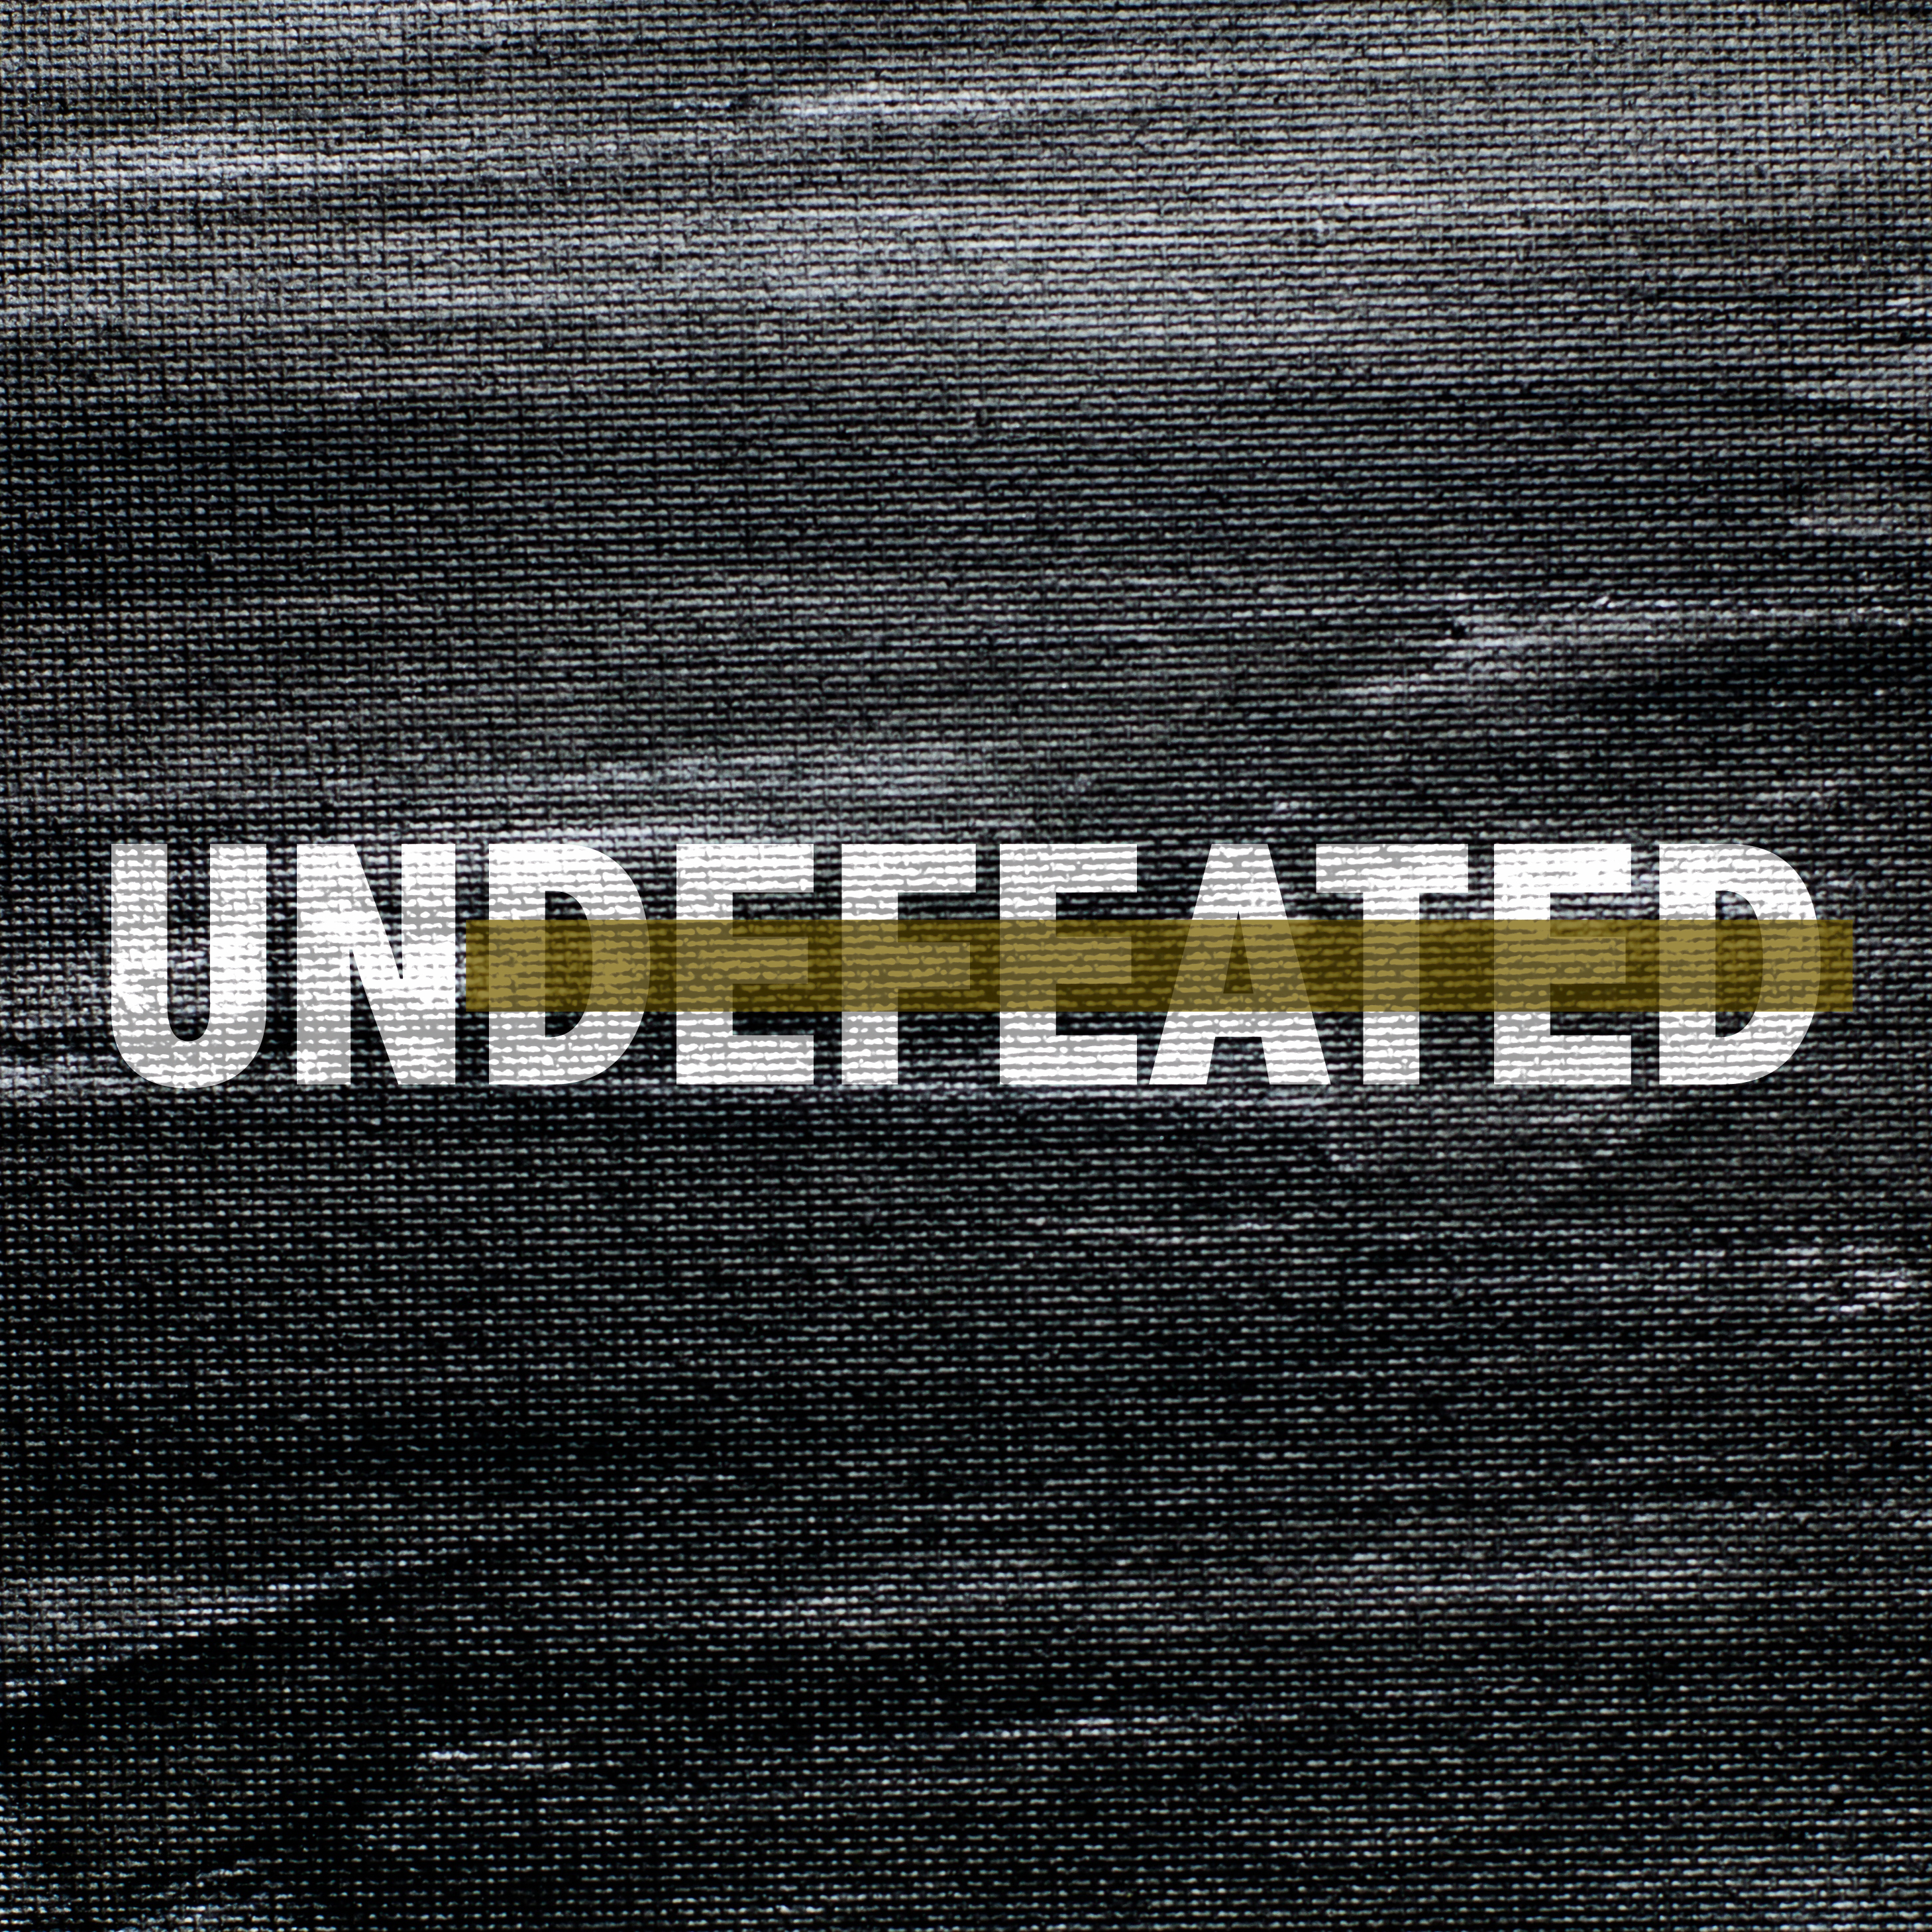 Undefeated – Week Two